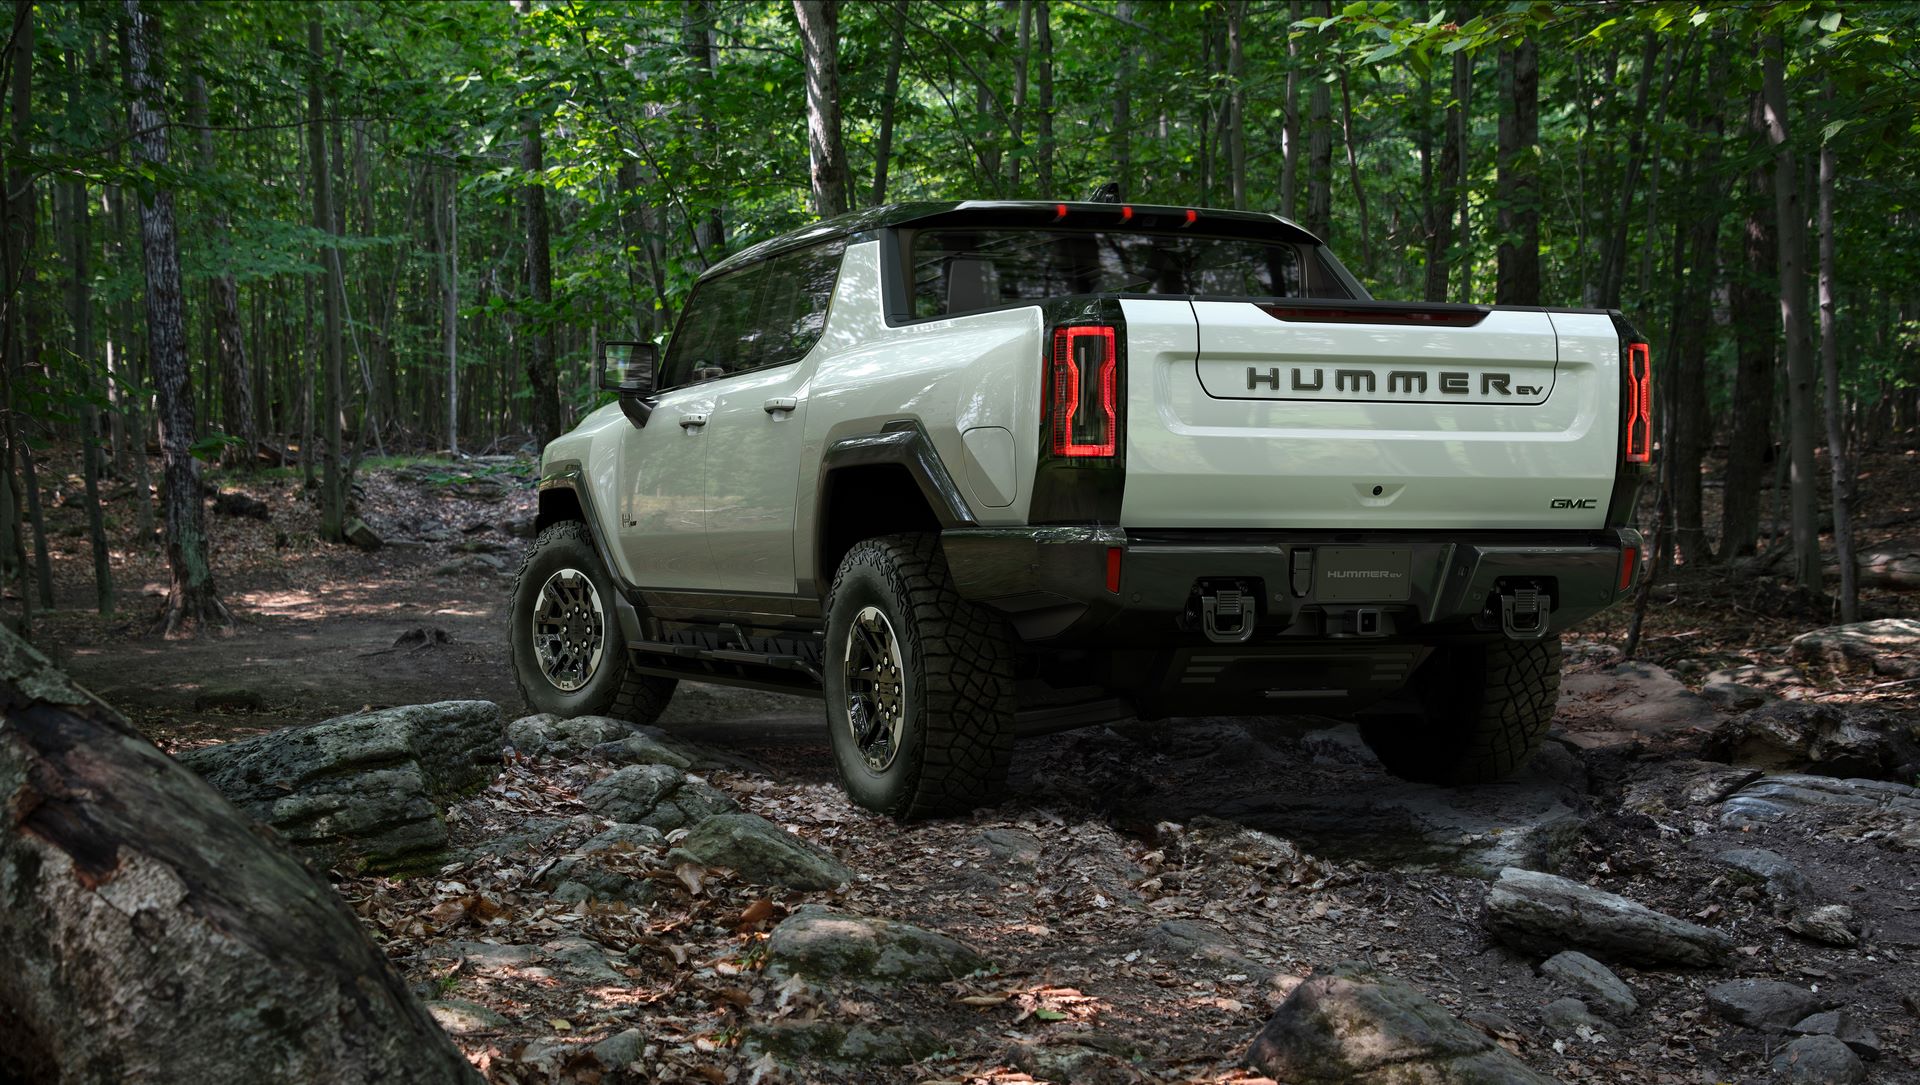 The GMC HUMMER EV is designed to be an off-road beast, with all-new features developed to conquer virtually any obstacle or terrain.